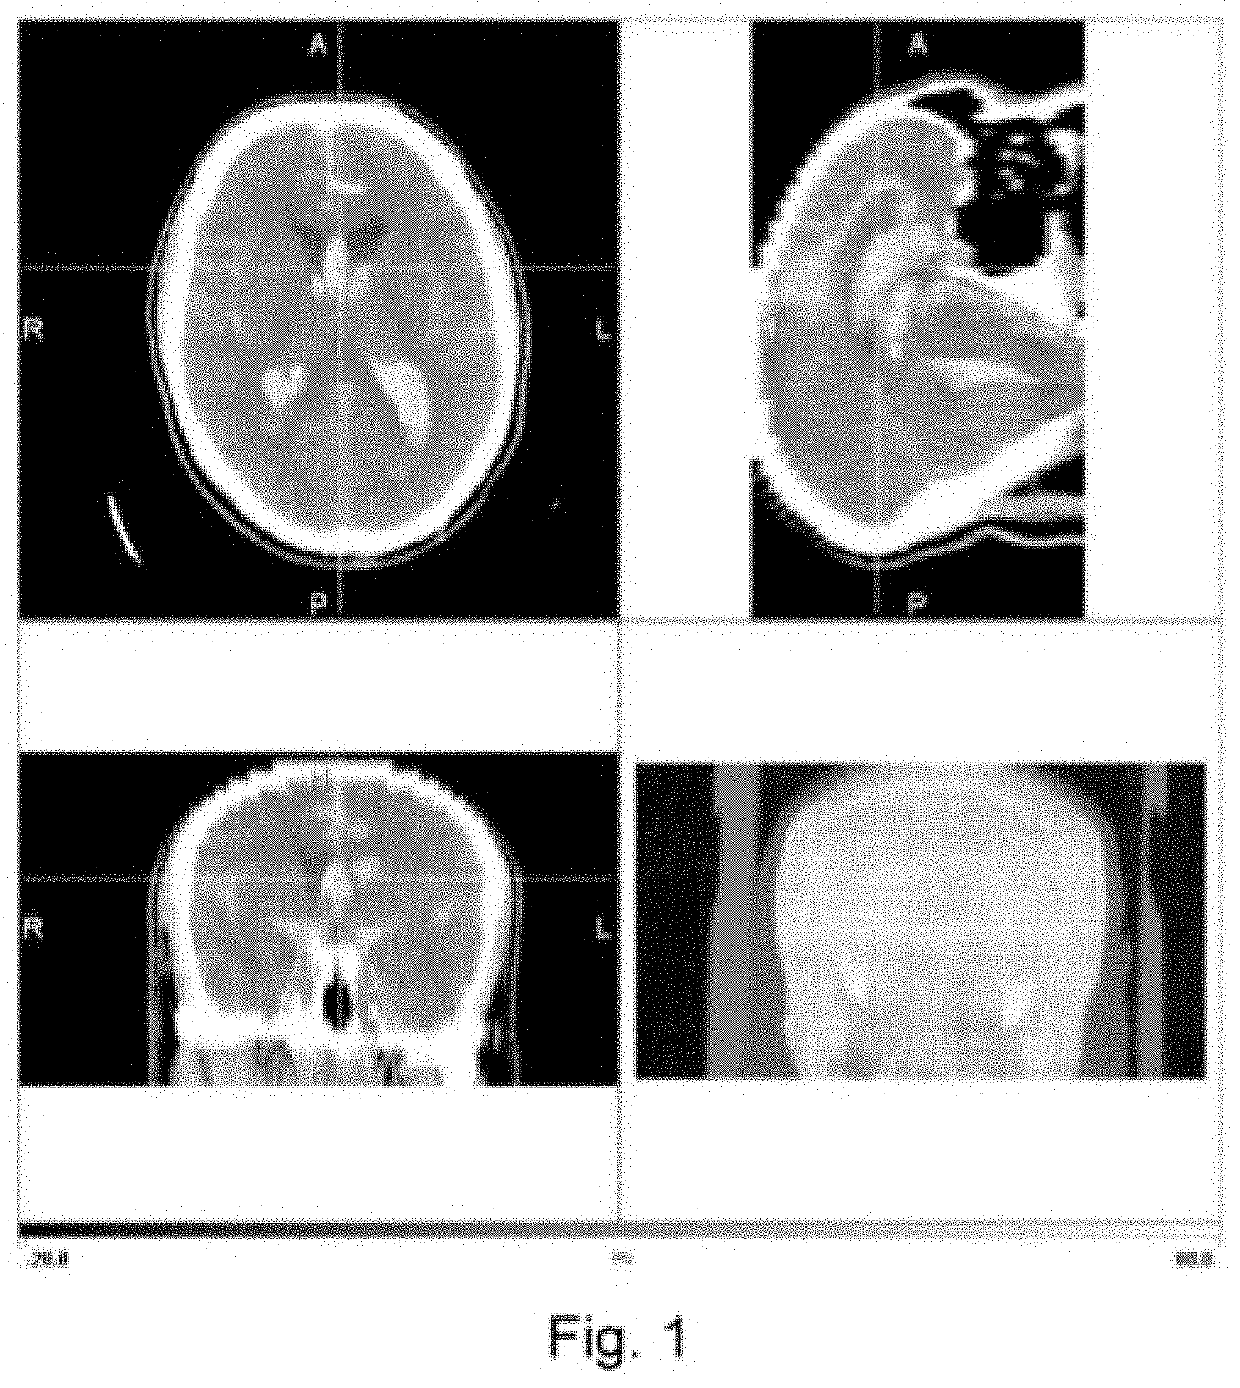 Method for predicting or prognosticating the risk of death or vasospasm in a patient with a subarachnoid hemorrhage